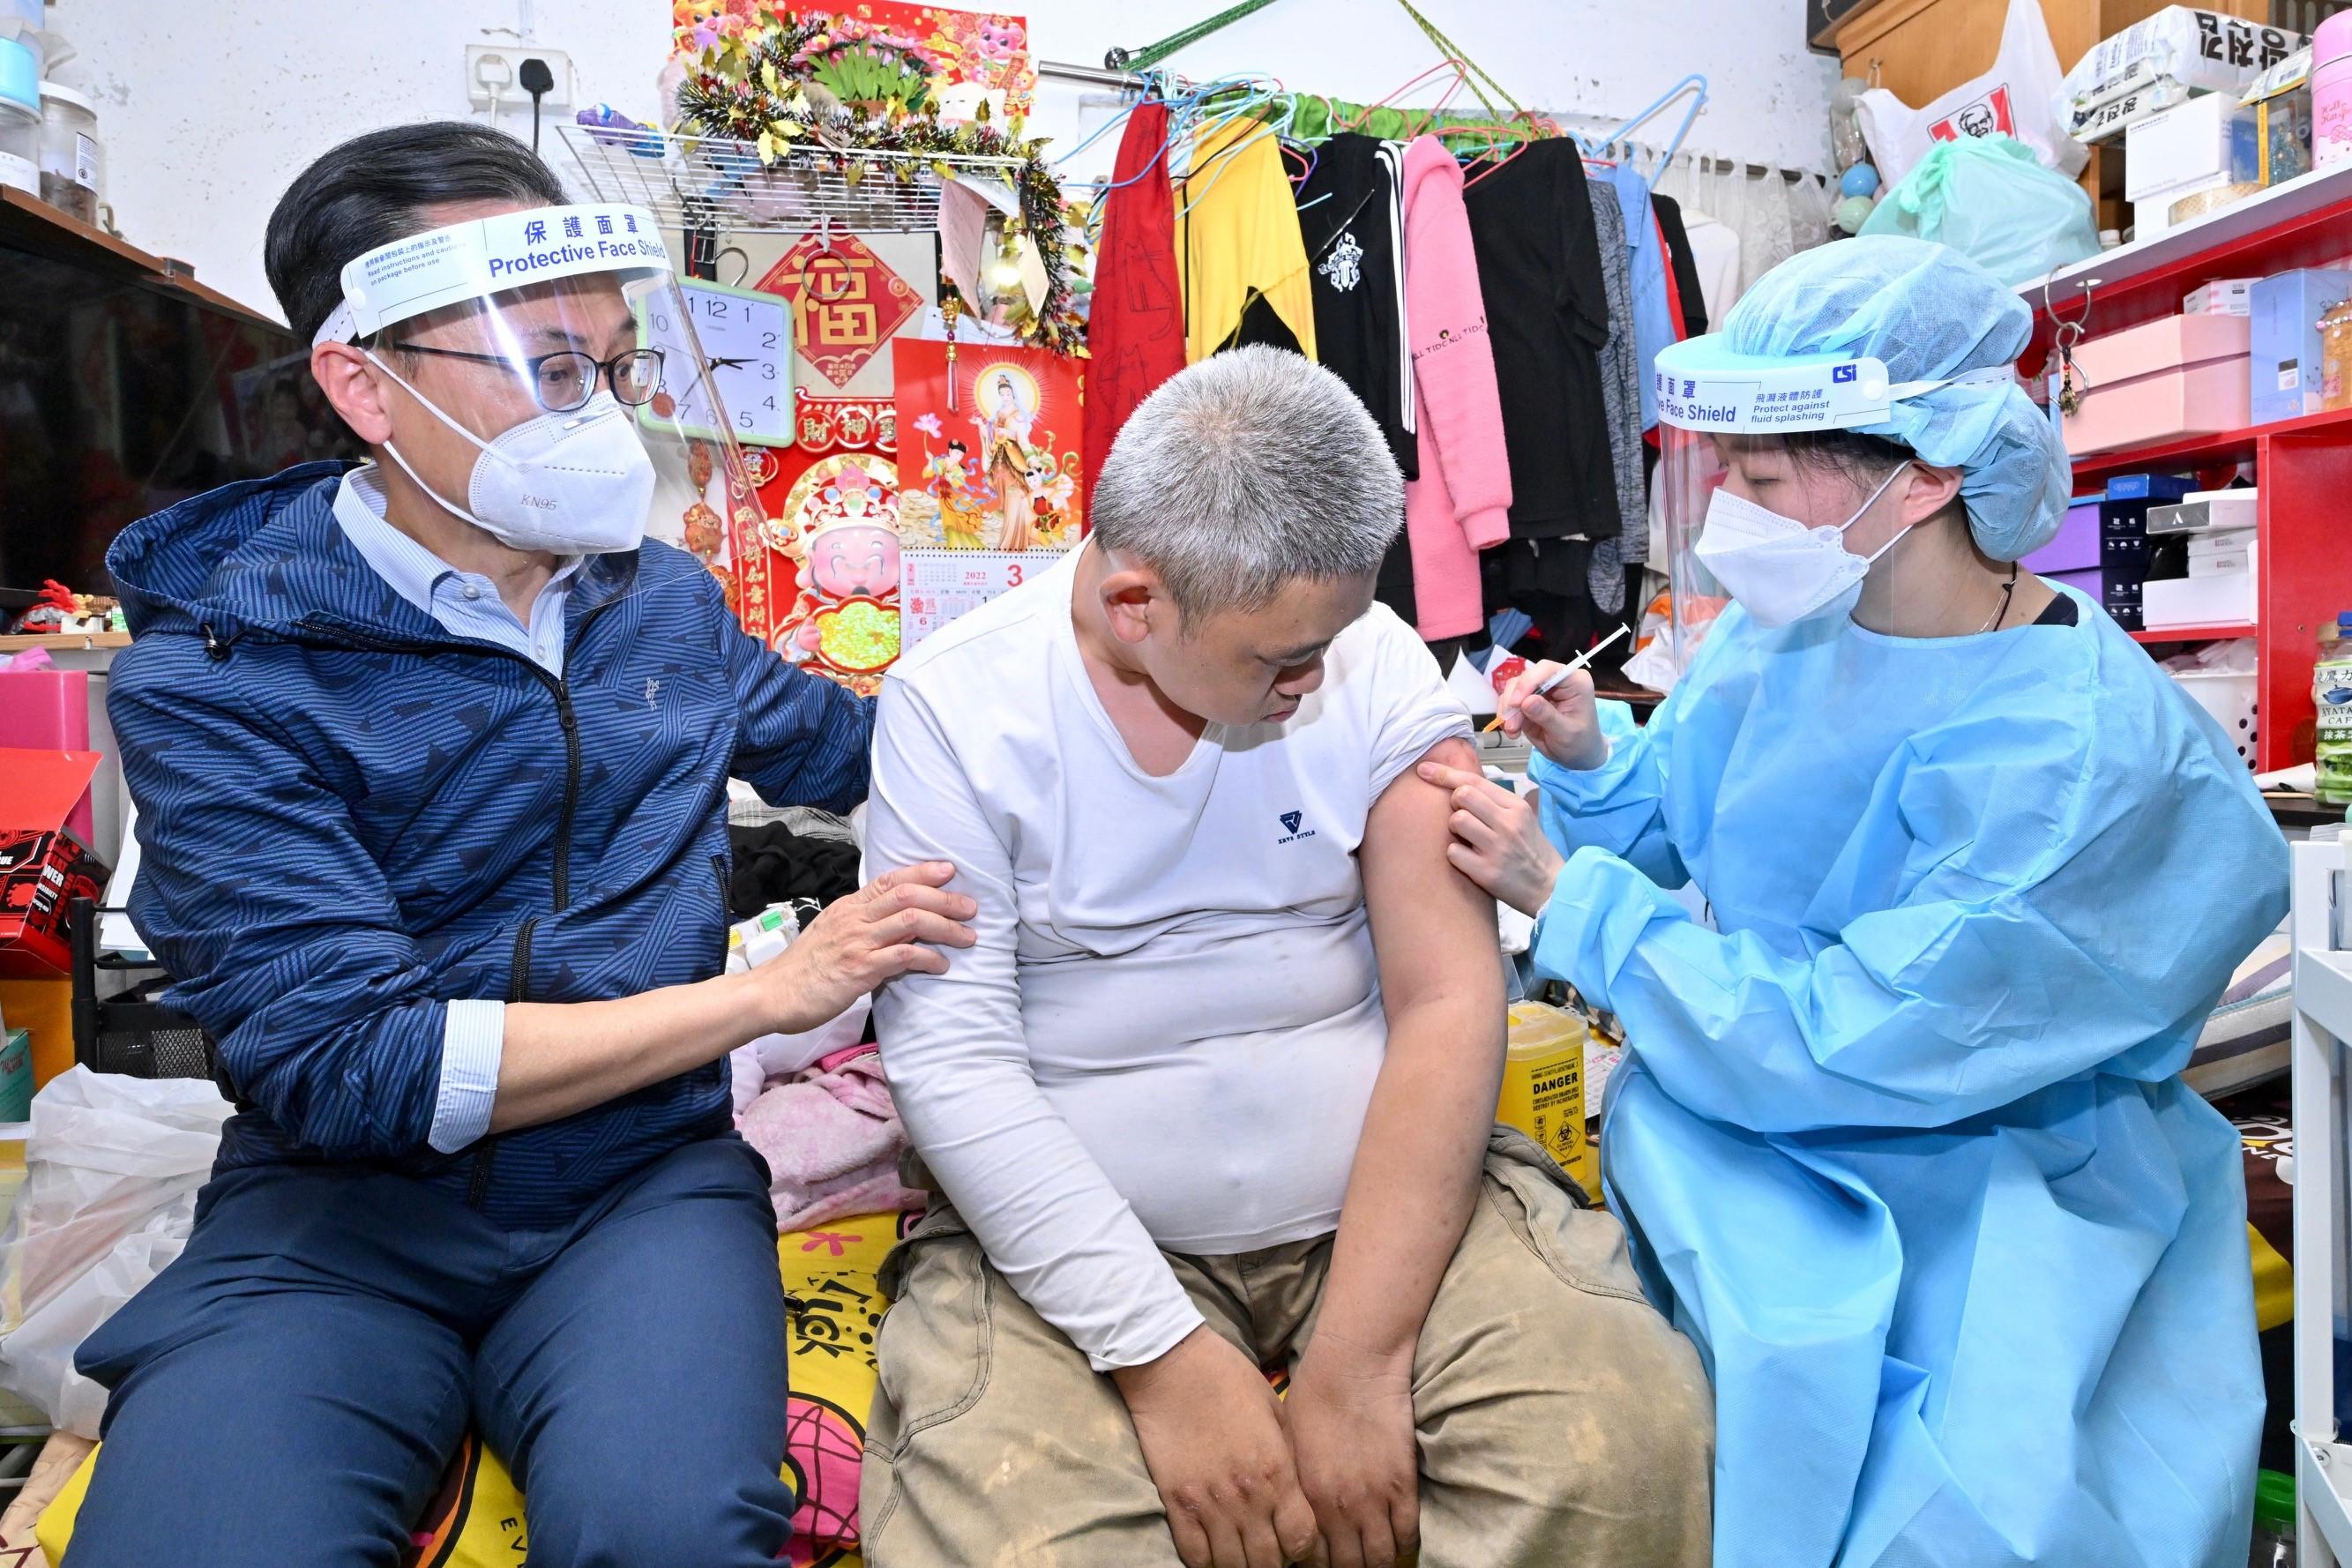 The Government has for the first time arranged a medical team to visit Sun Kit House, Sun Chui Estate in Sha Tin, to conduct a trial to provide door-to-door COVID-19 vaccination service to elderly persons aged 70 or above who have yet to get vaccinated and persons who are unable to leave their homes for vaccination due to illness or physical disability today (March 31). Photo shows a resident with special needs (centre) receiving the COVID-19 vaccine. Looking on is the Secretary for the Civil Service, Mr Patrick Nip (left).
